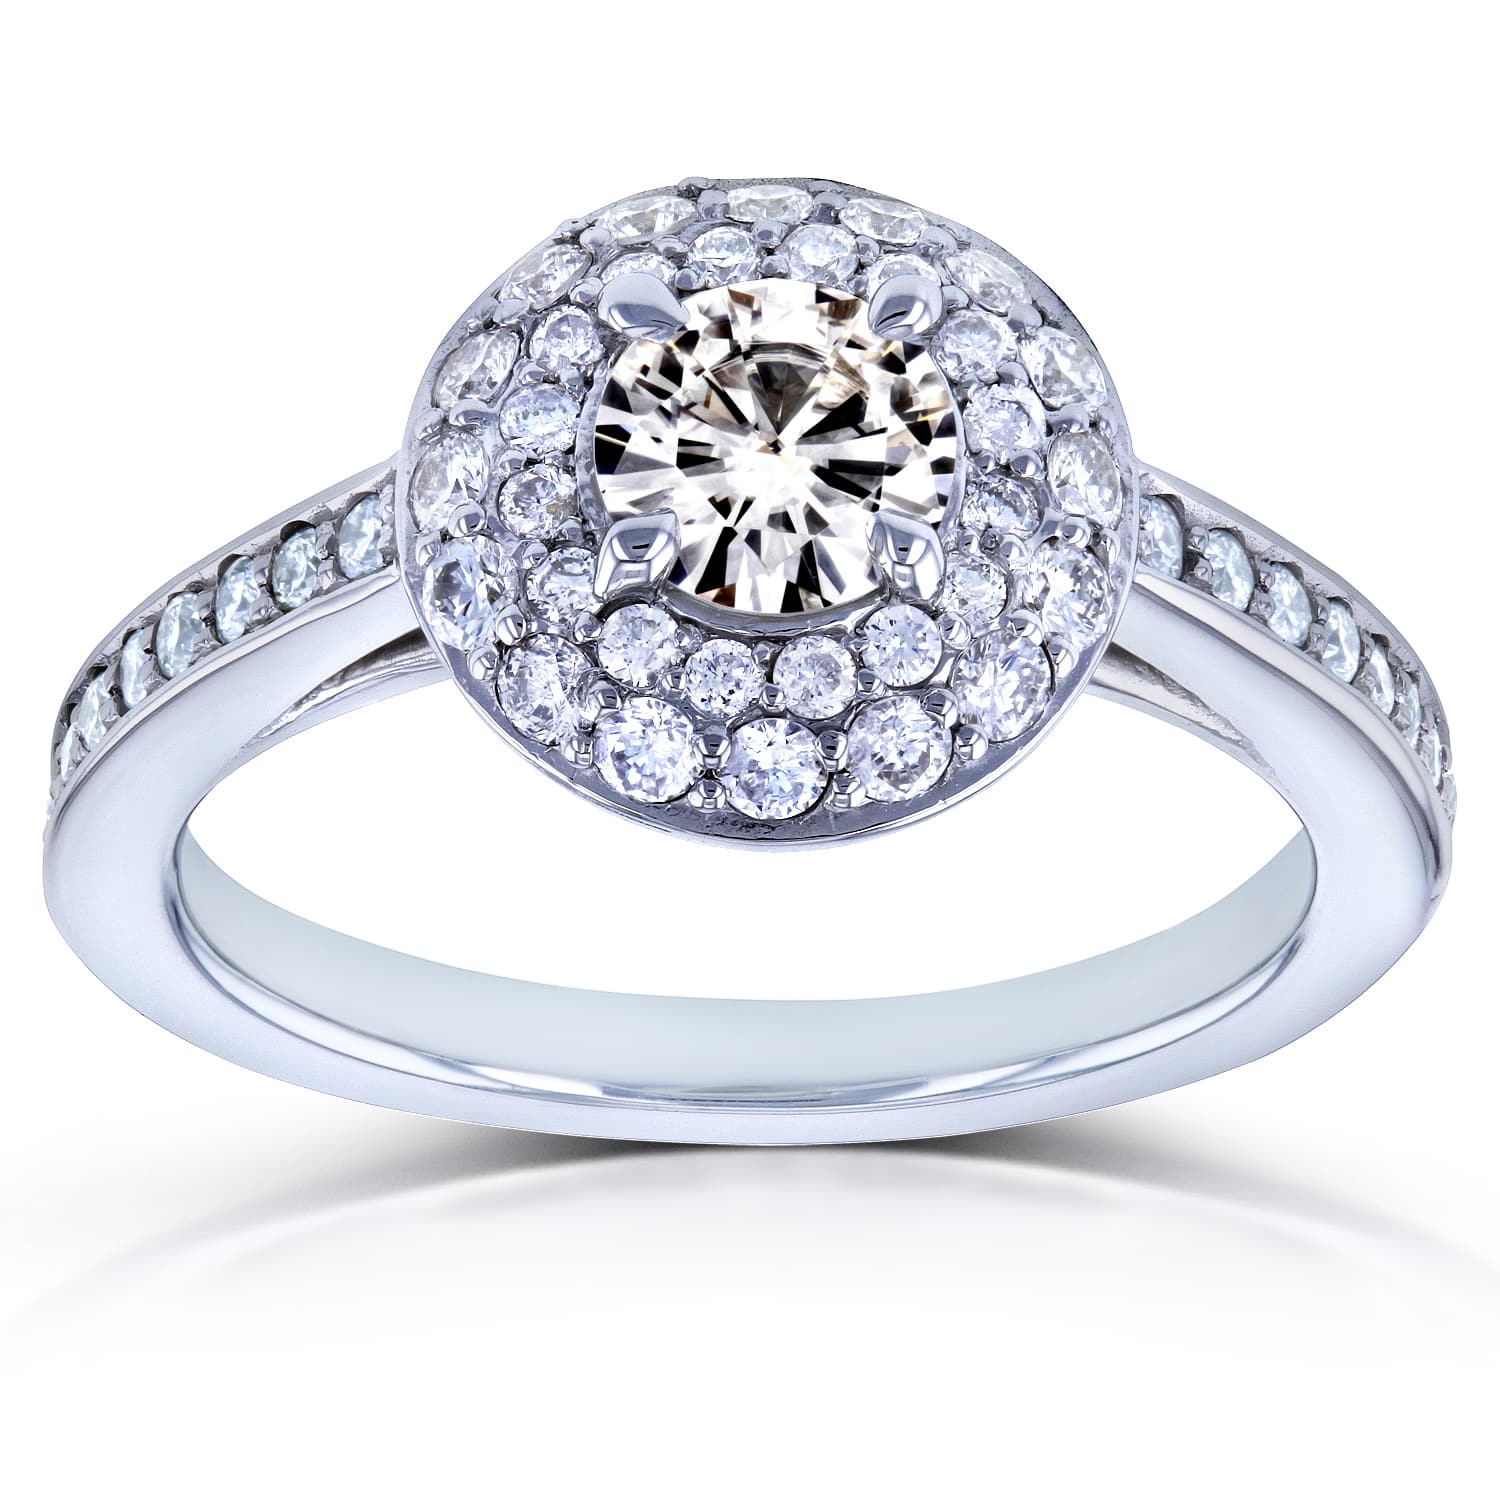 Best Place To Buy A Moissanite Engagement Ring ...